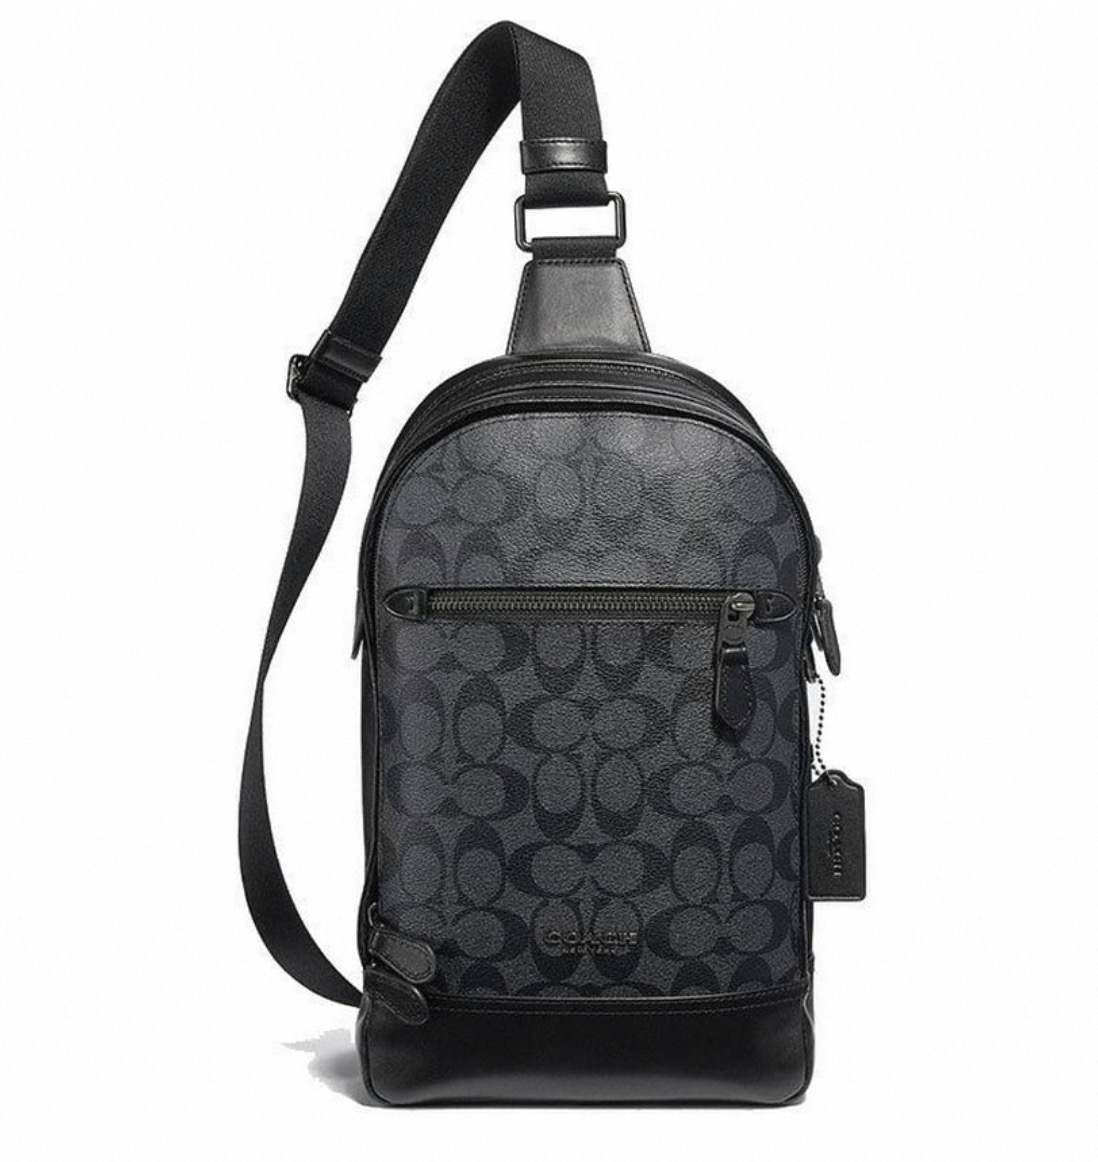 Coach Bags for Men: A Fusion of Elegance and Practicality